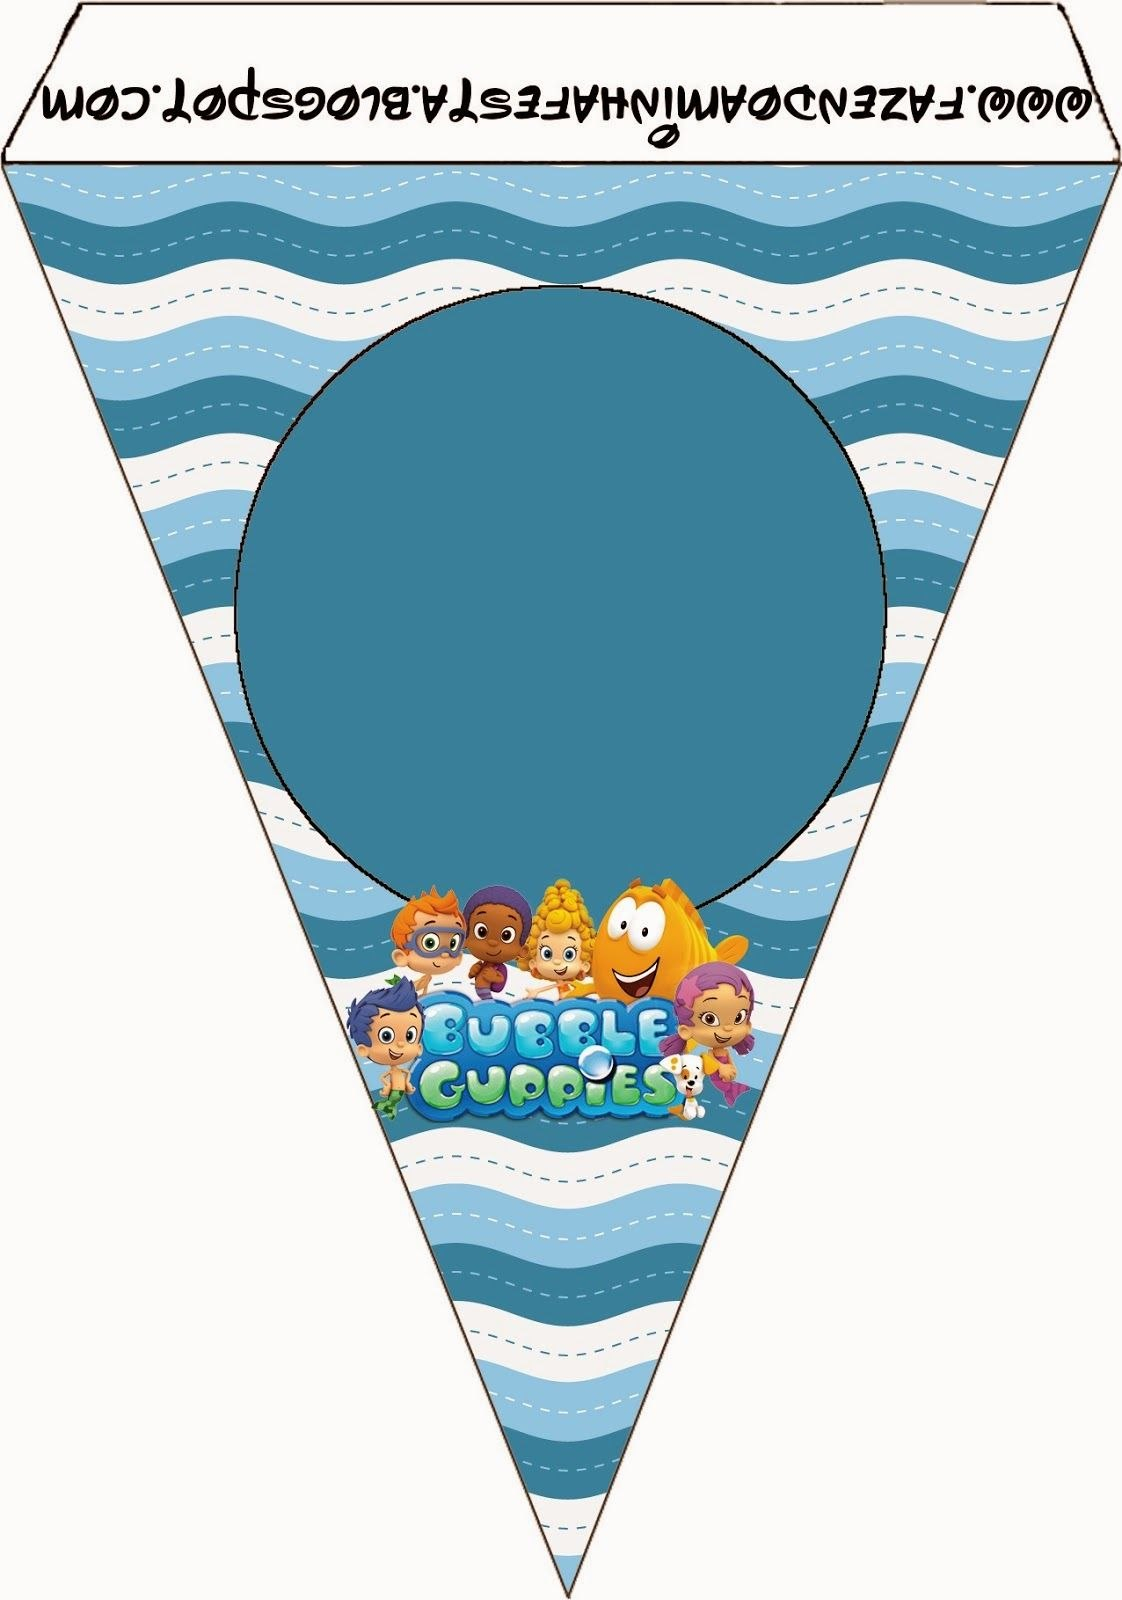 Bubble Guppies Free Party Printables  Happy Birthday To Youuuu in Bubble Guppies Birthday Banner Template